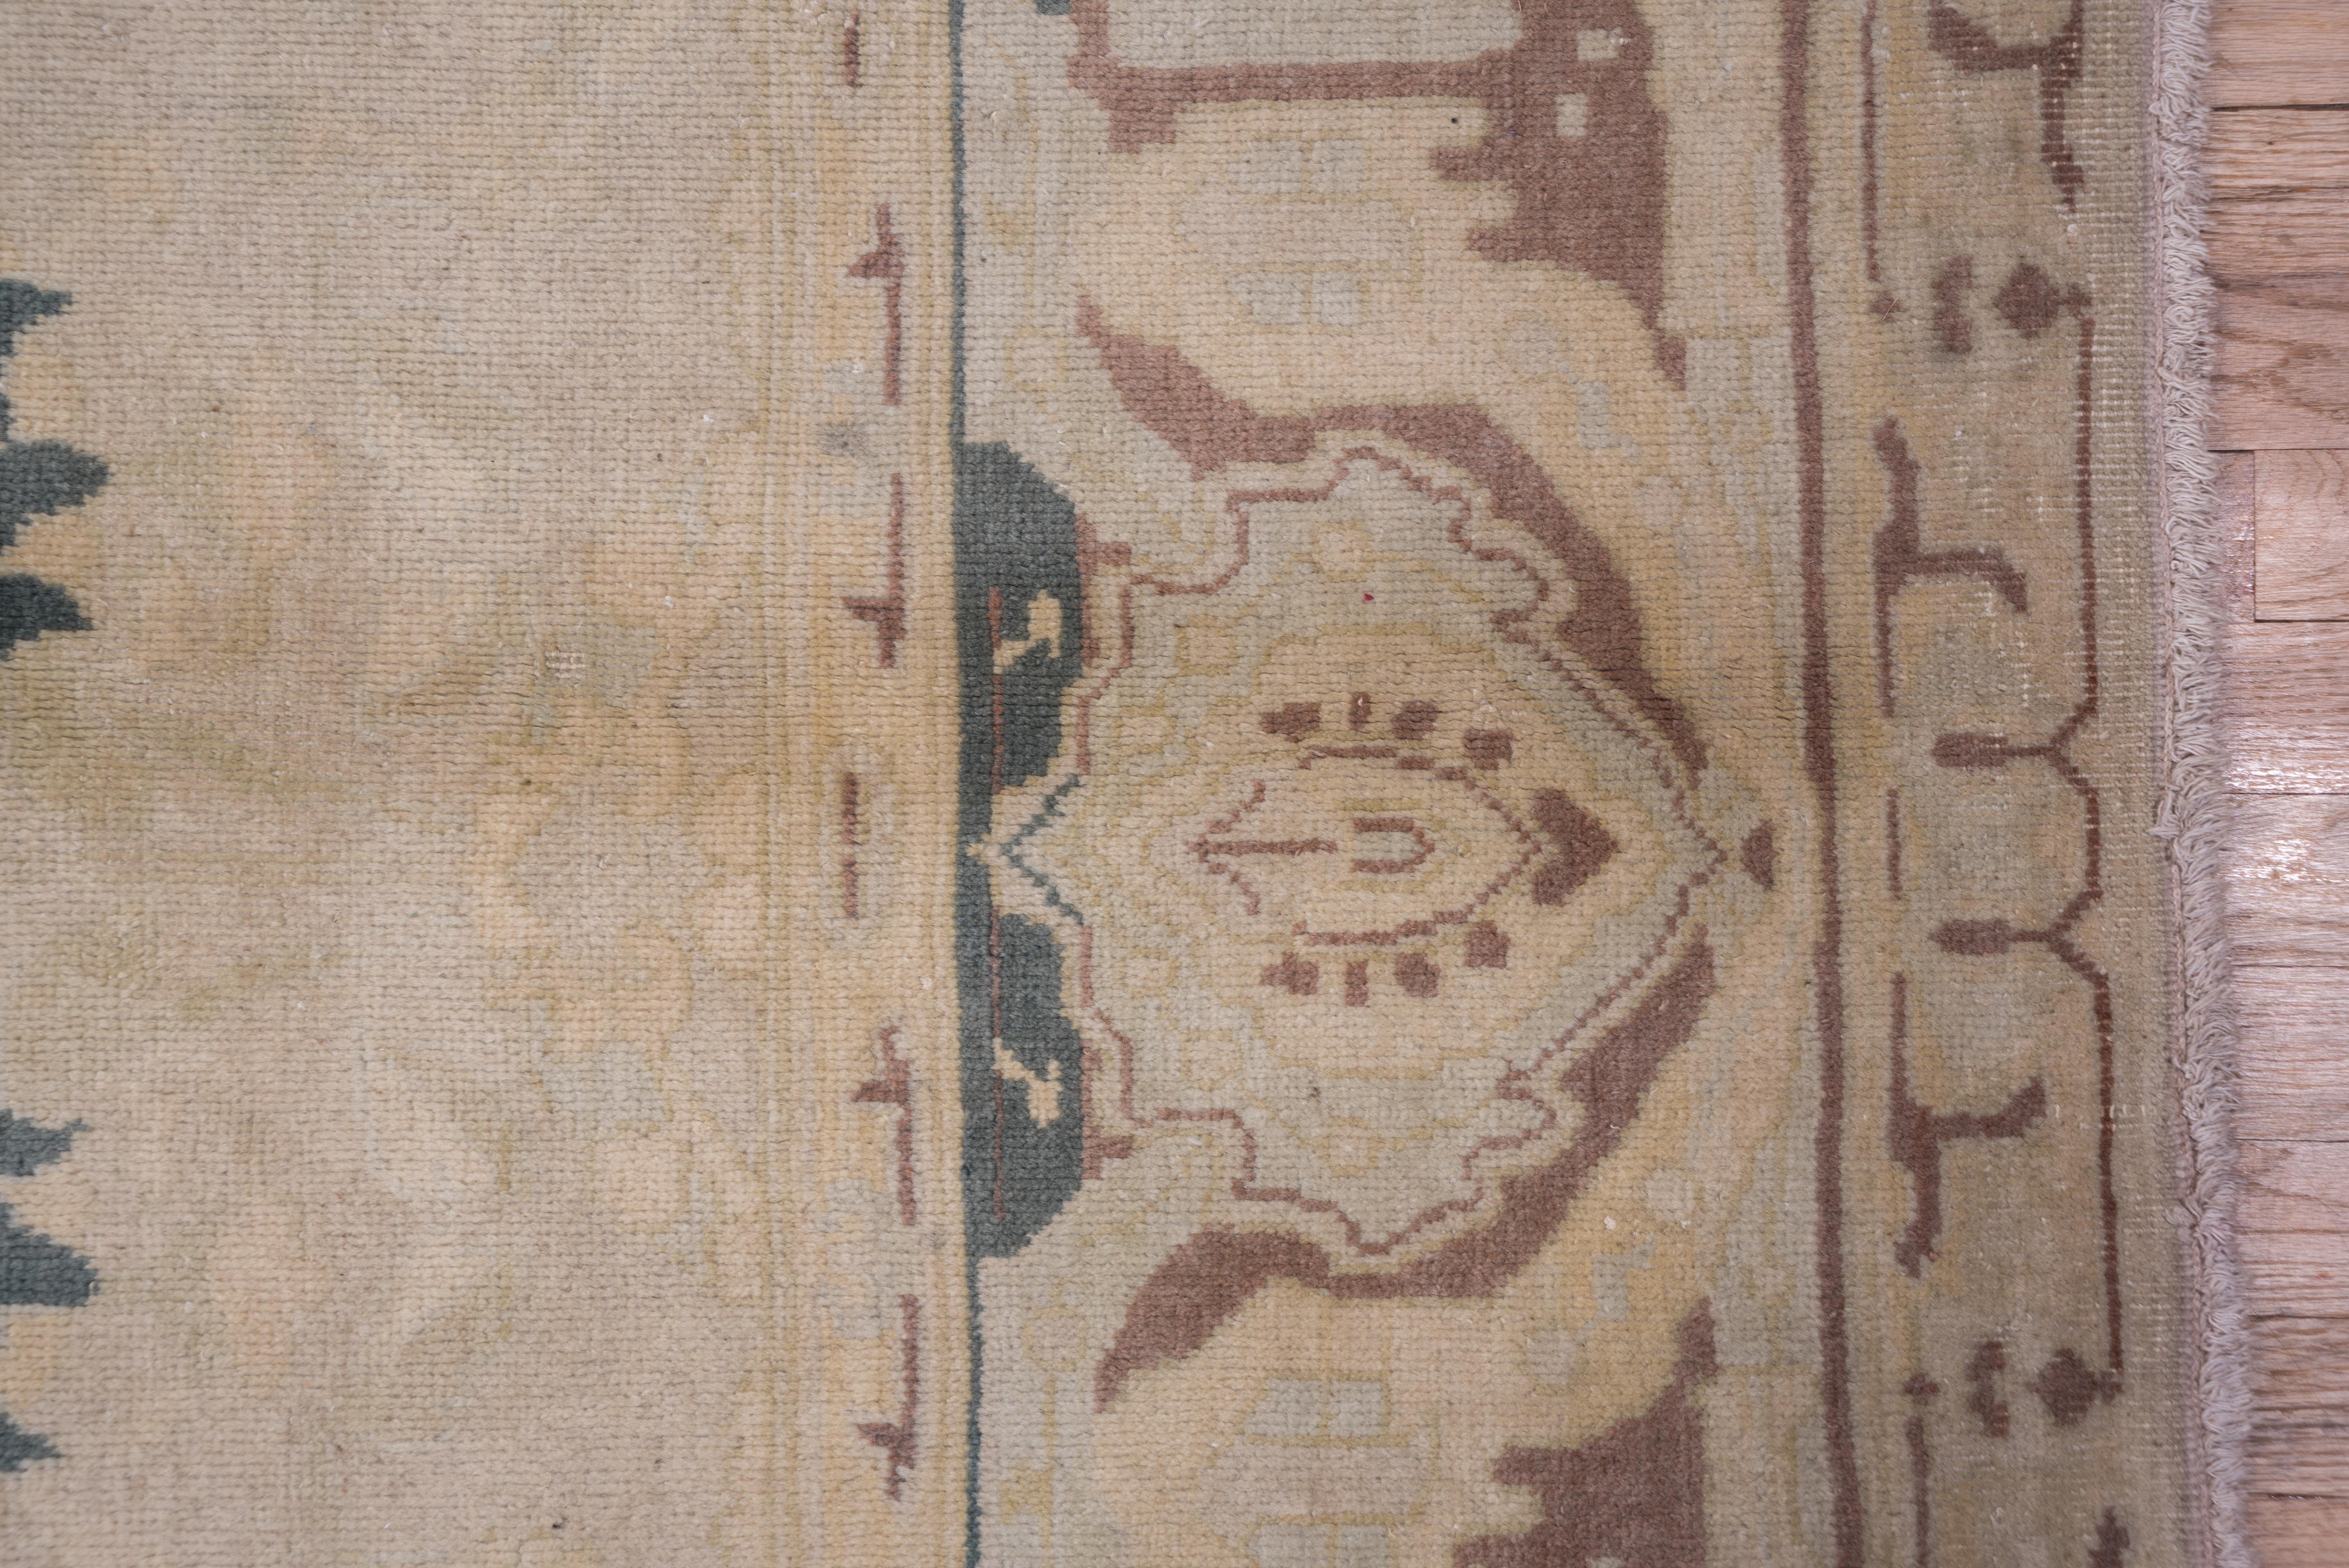 Large brown petal palmettes in erect and lazy positions dominate the central axis of the abrashed beige field, with a stencil pattern mauve border of strapwork and reversing palmettes.